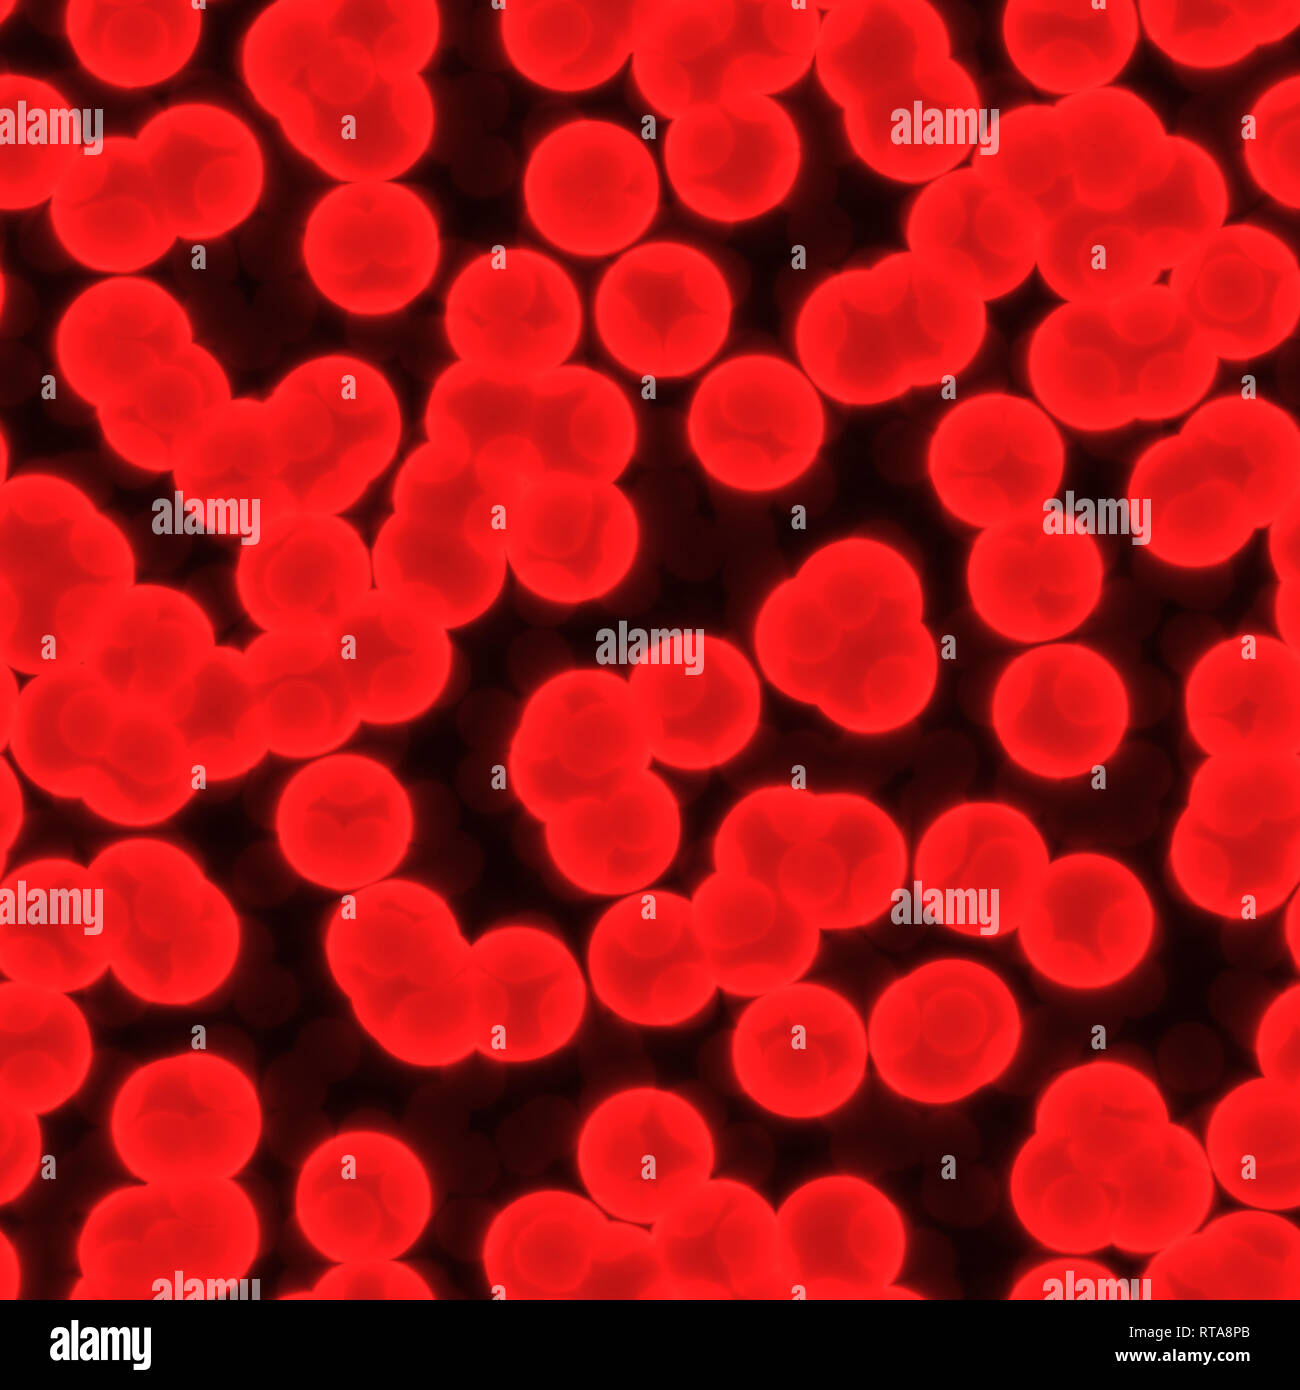 Abstract illustration of red blood cells seamless pattern Stock Photo